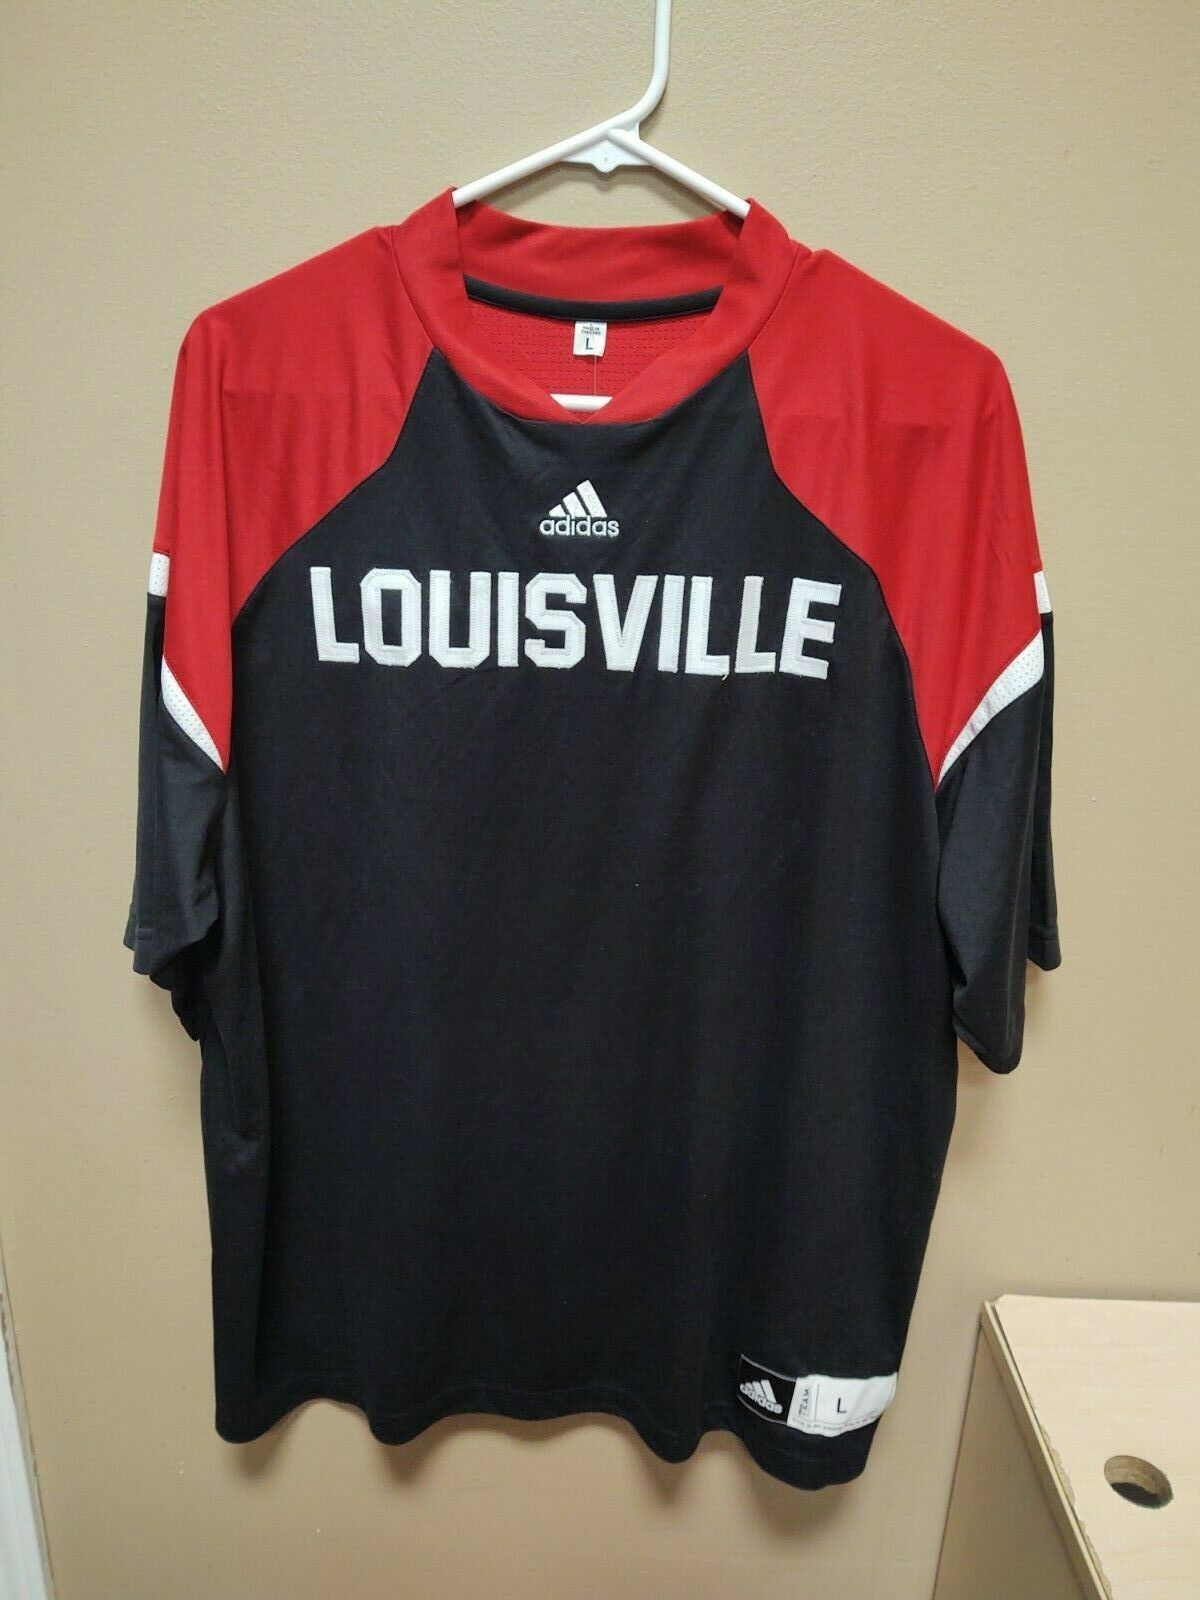 Primary image for New Adidas Men’s Louisville Cardinals Short Sleeve Shooting Shirt Large Z27308